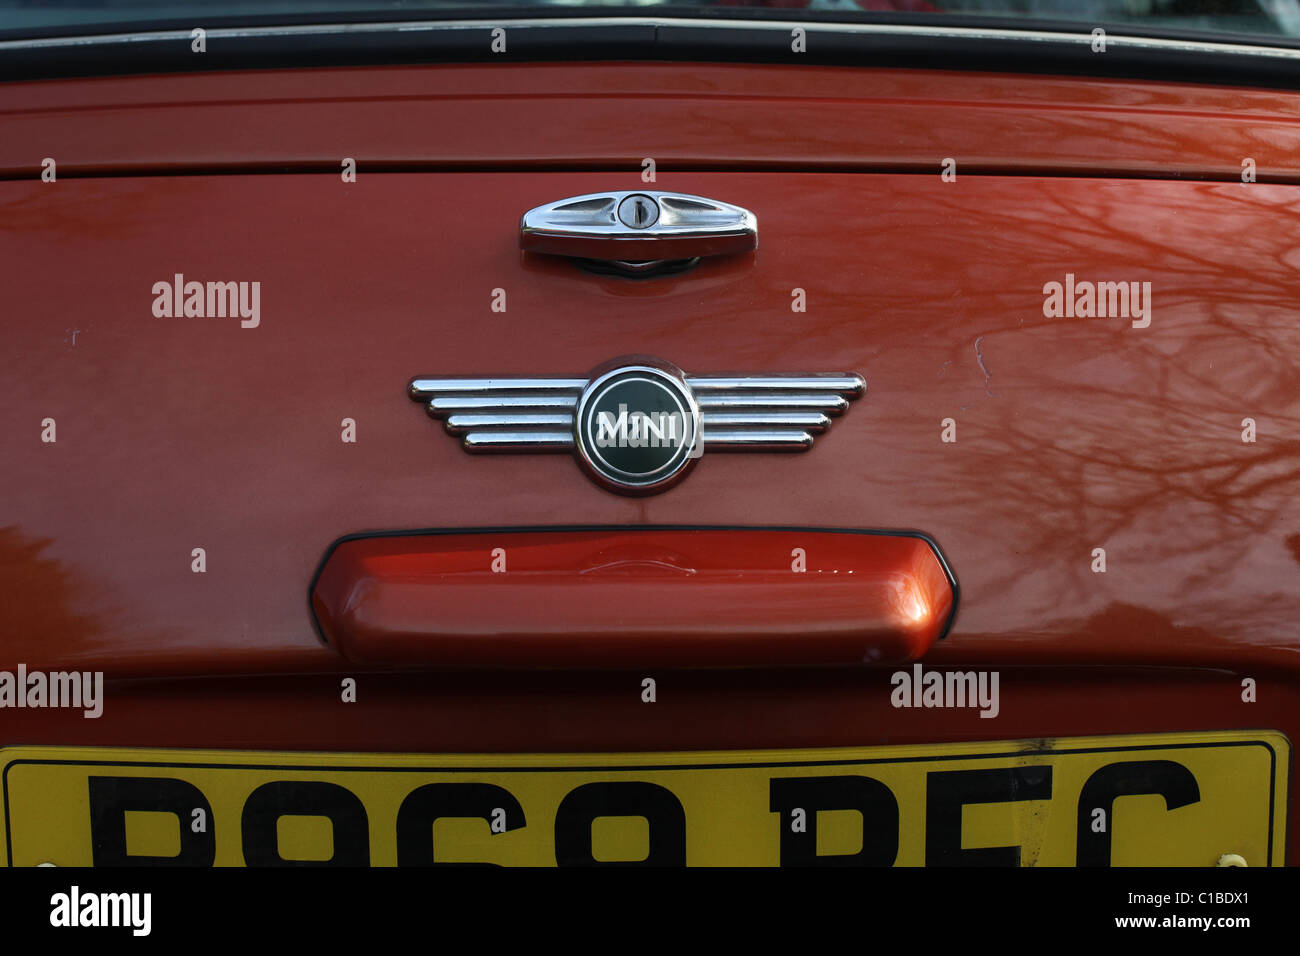 Detail of a classic Rover Mini car Stock Photo